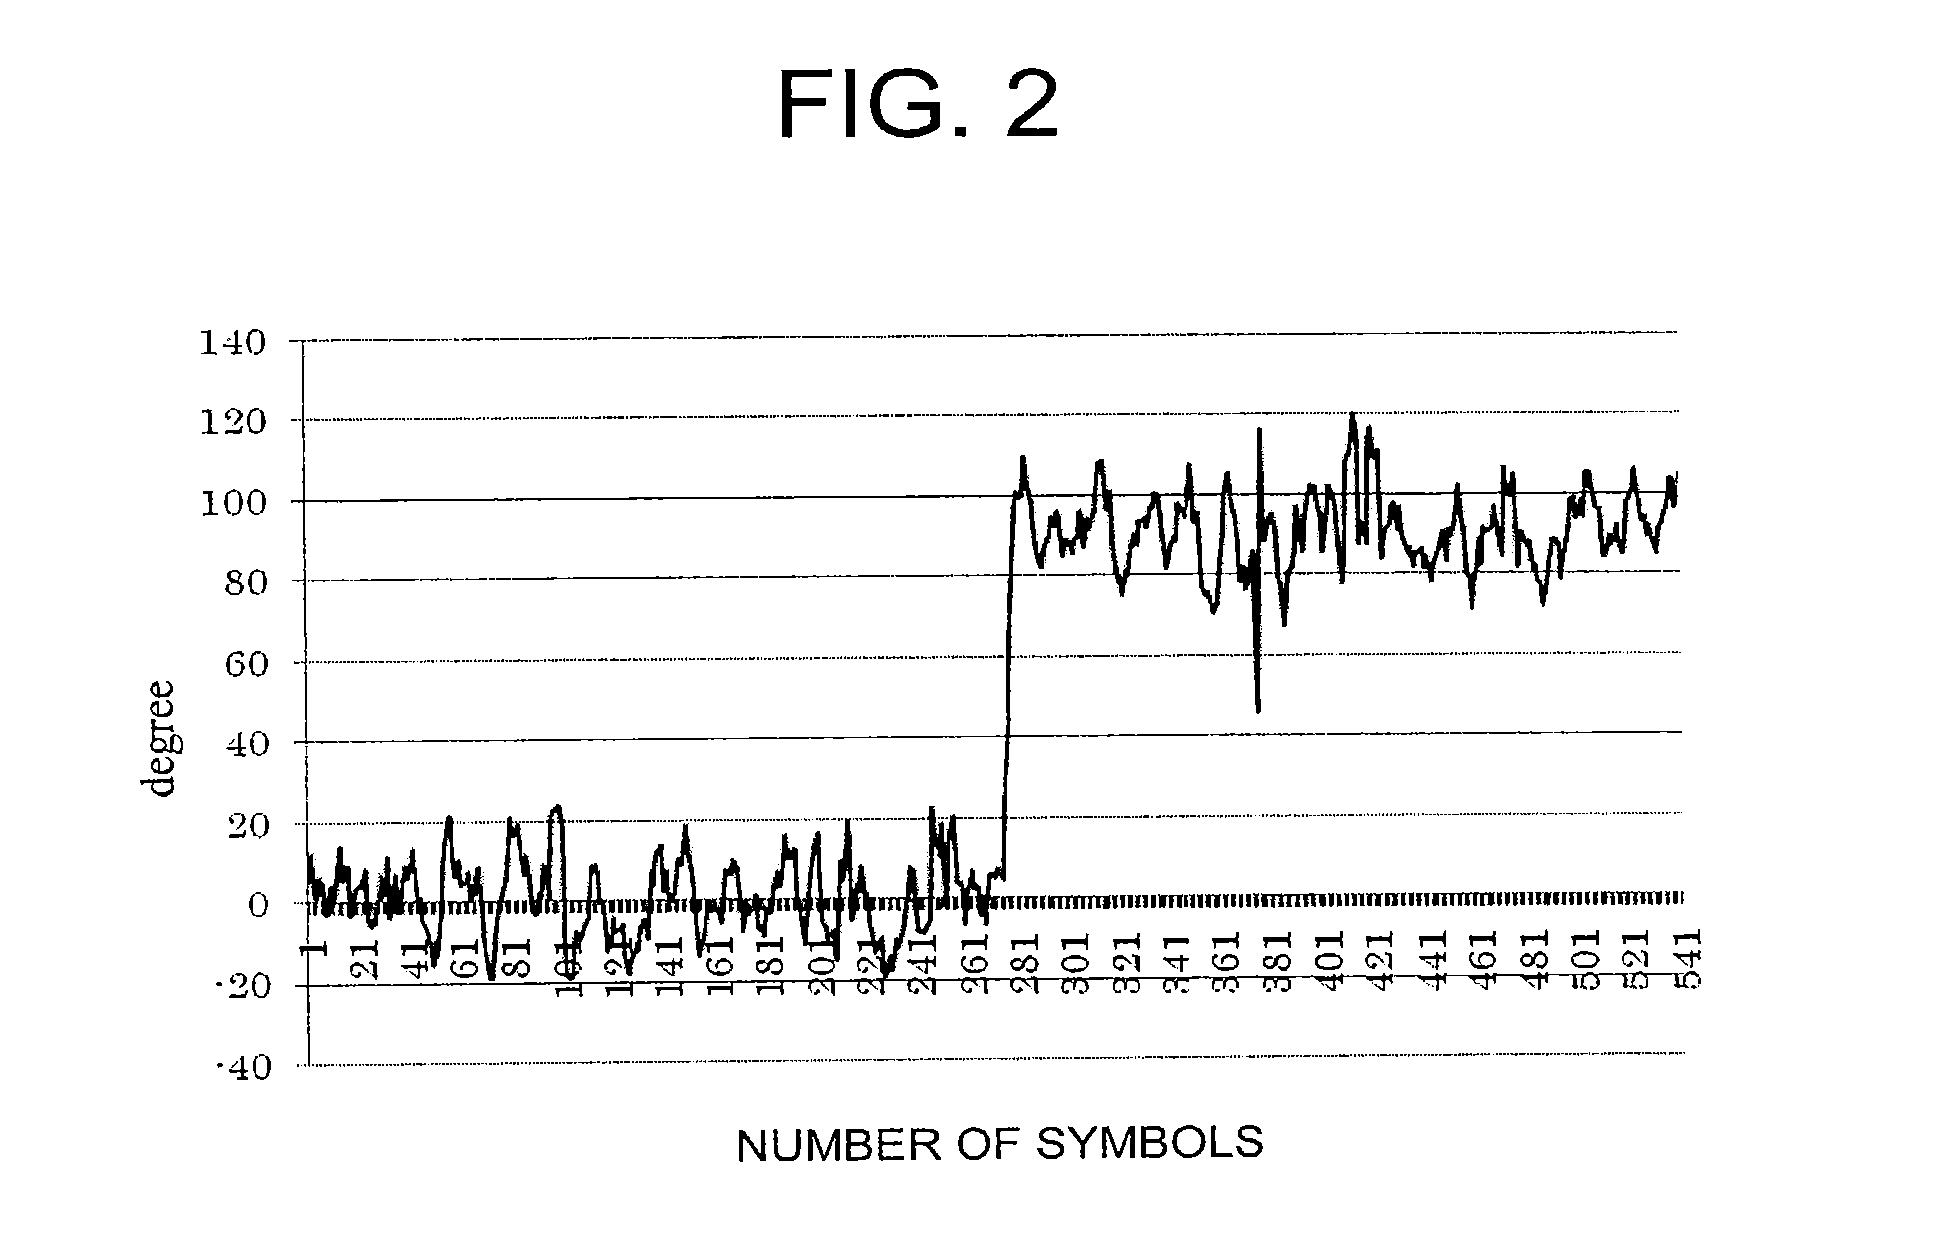 Receiver, transmitter, and communication method